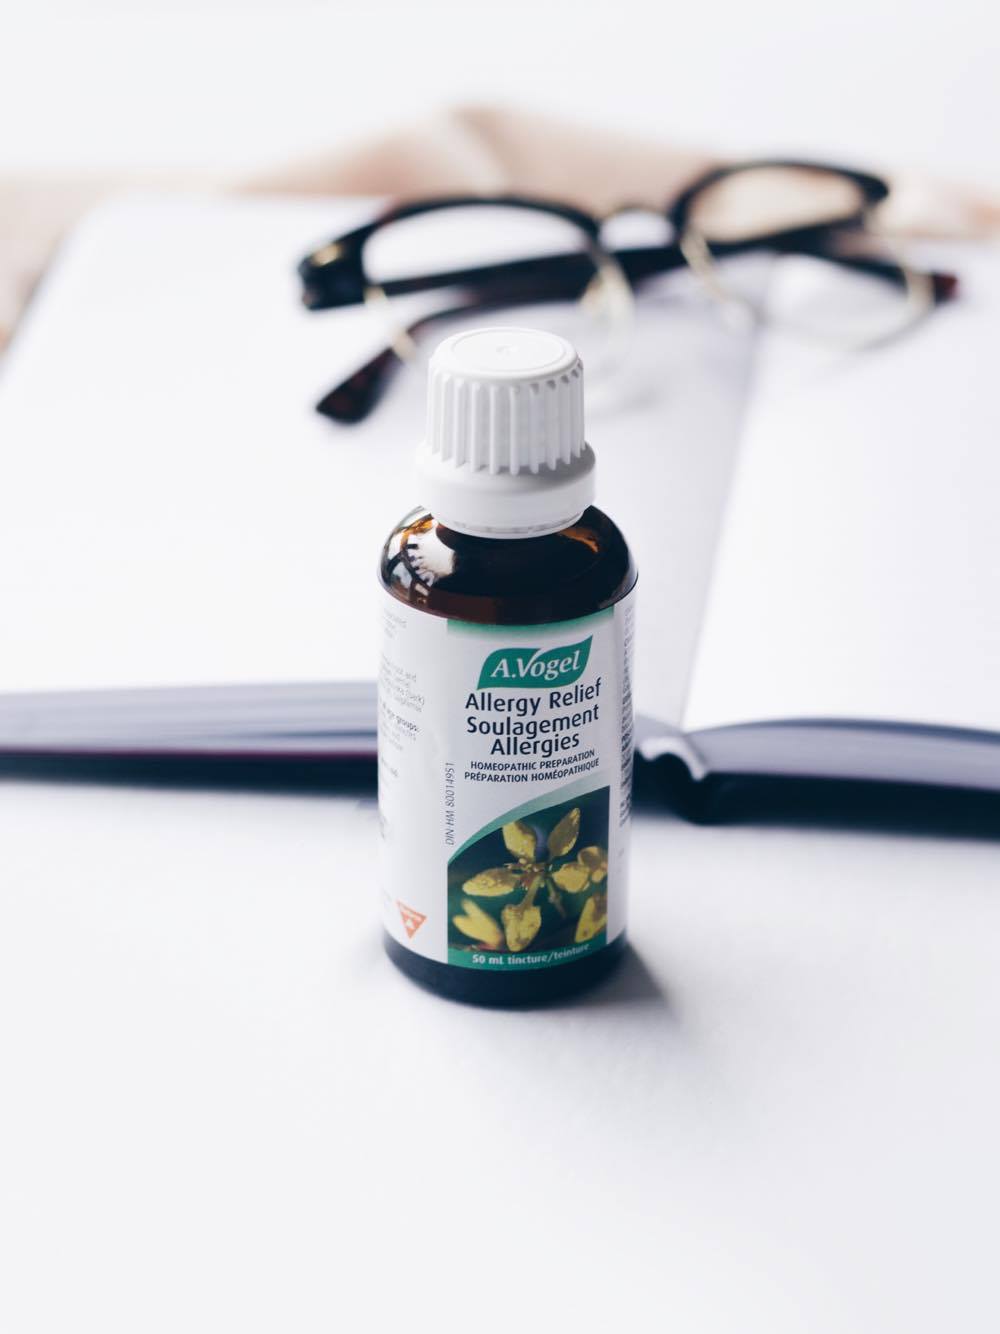 Using A.Vogel to stay Allergy-Free